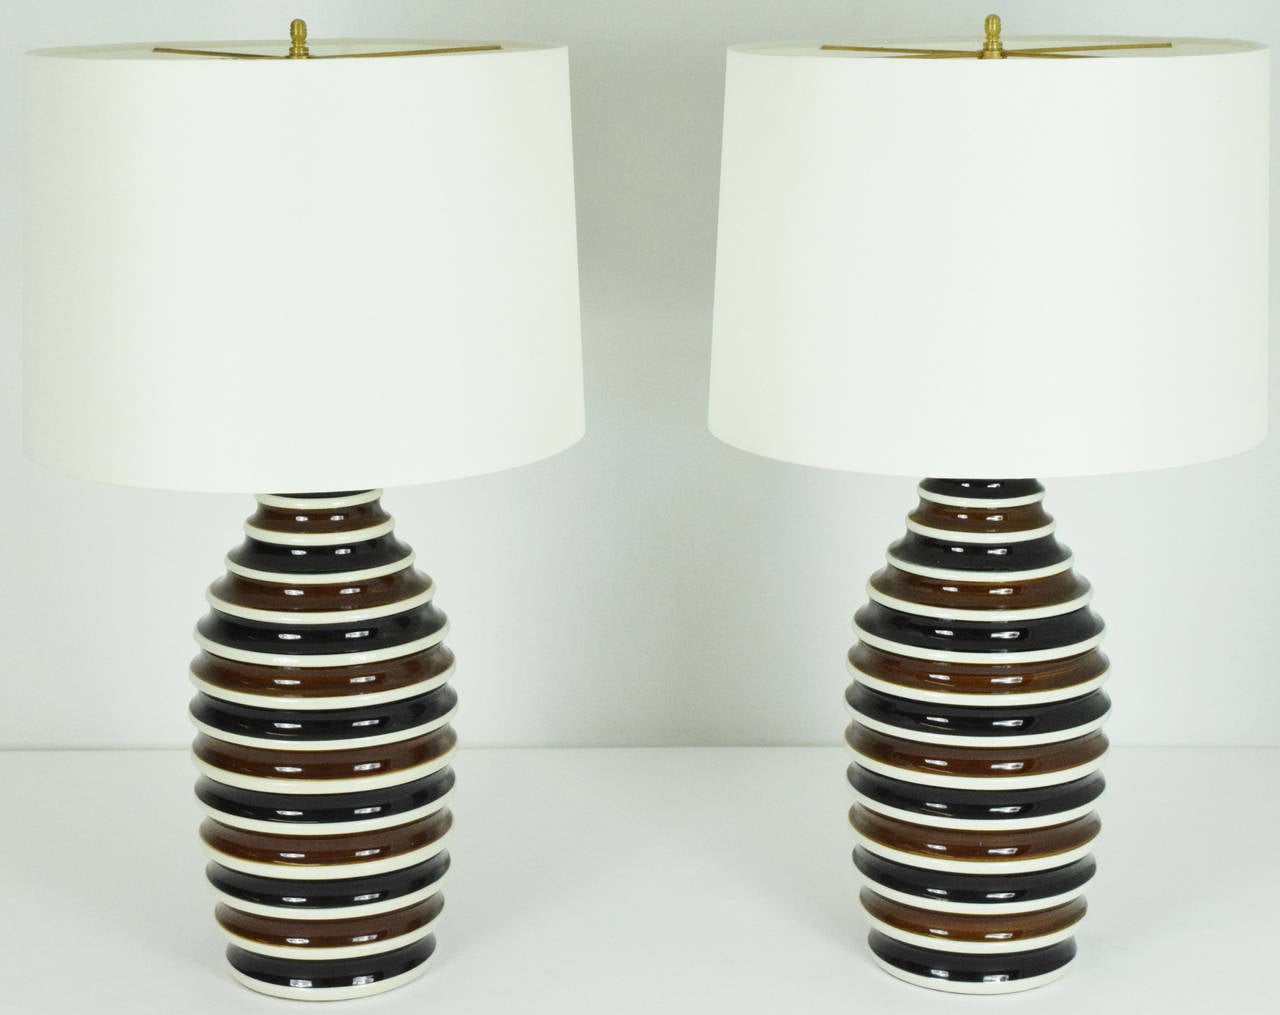 A beautiful pair of Morris Greenspan ceramic lamps in black, brown and white. Price excludes shades.